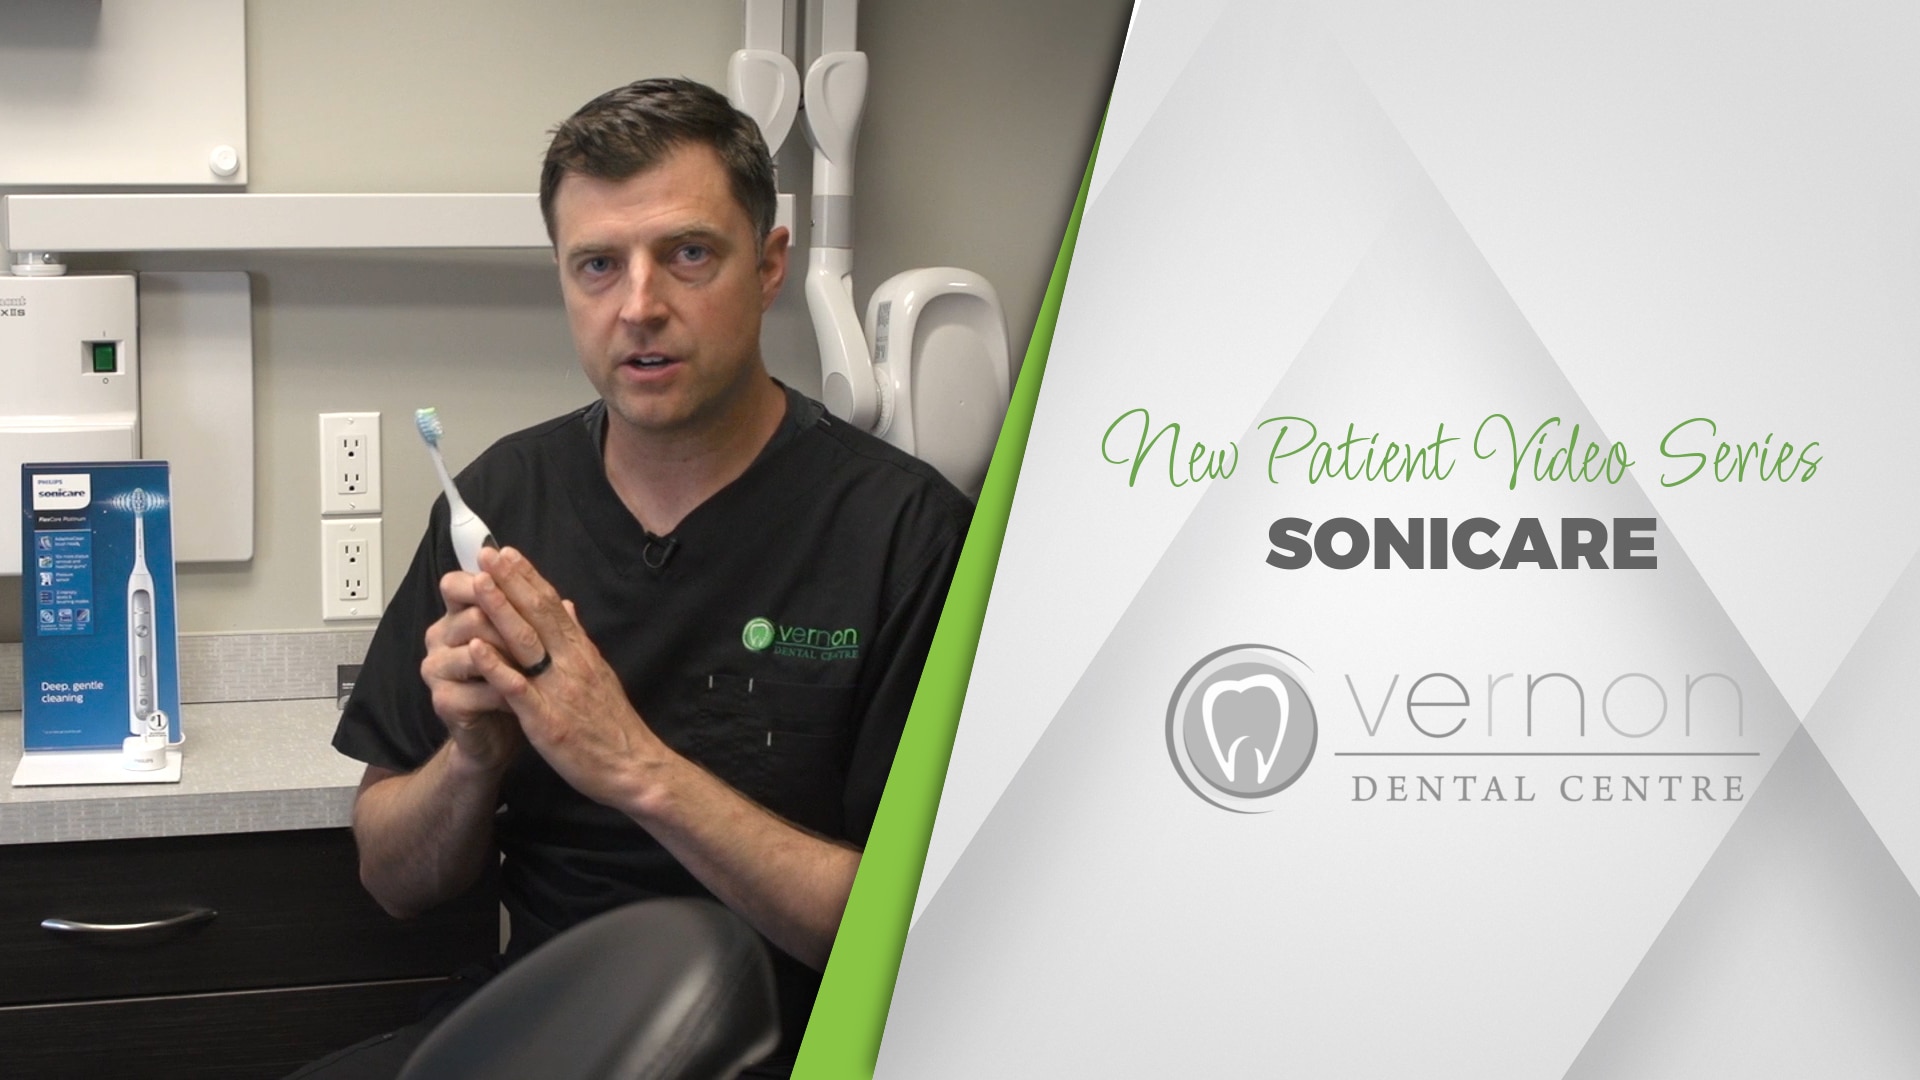 Dr. Anthony Berdan from Vernon Dental Centre discusses Sonicare Toothbrushes